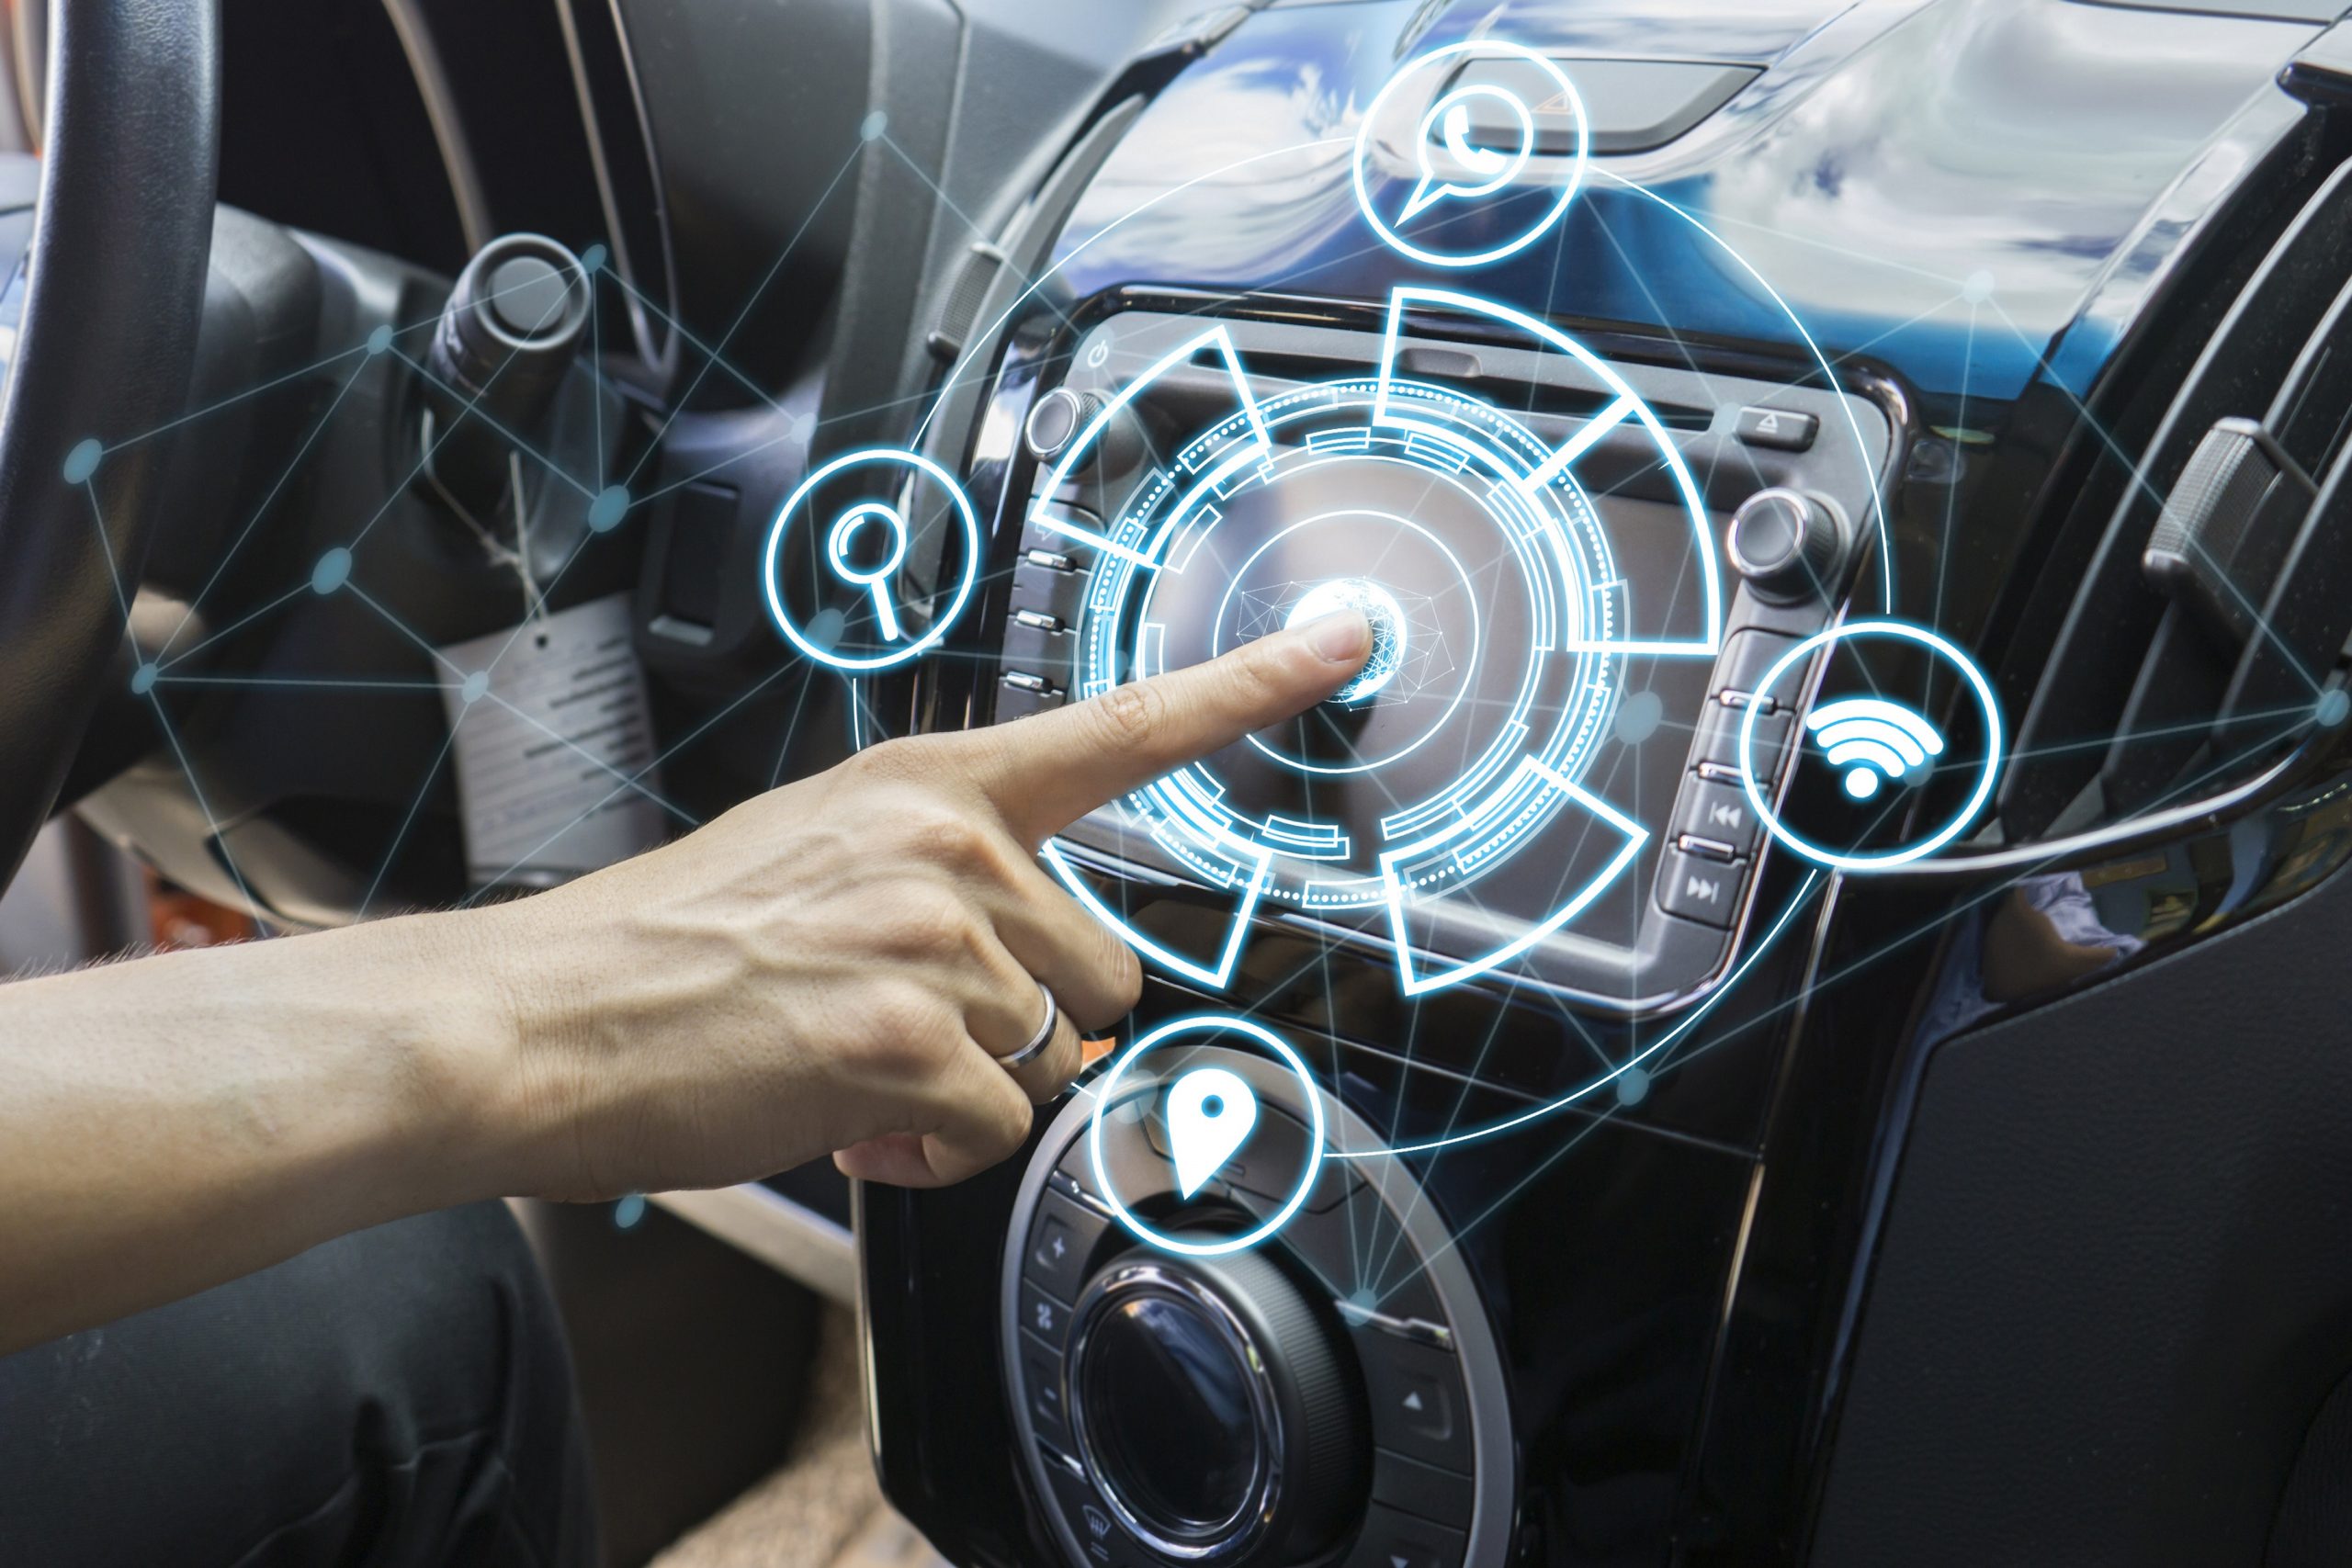 Automotive Advanced Driver Assistance Systems (ADAS) Market – Industry Analysis and Forecast (2018-2025)